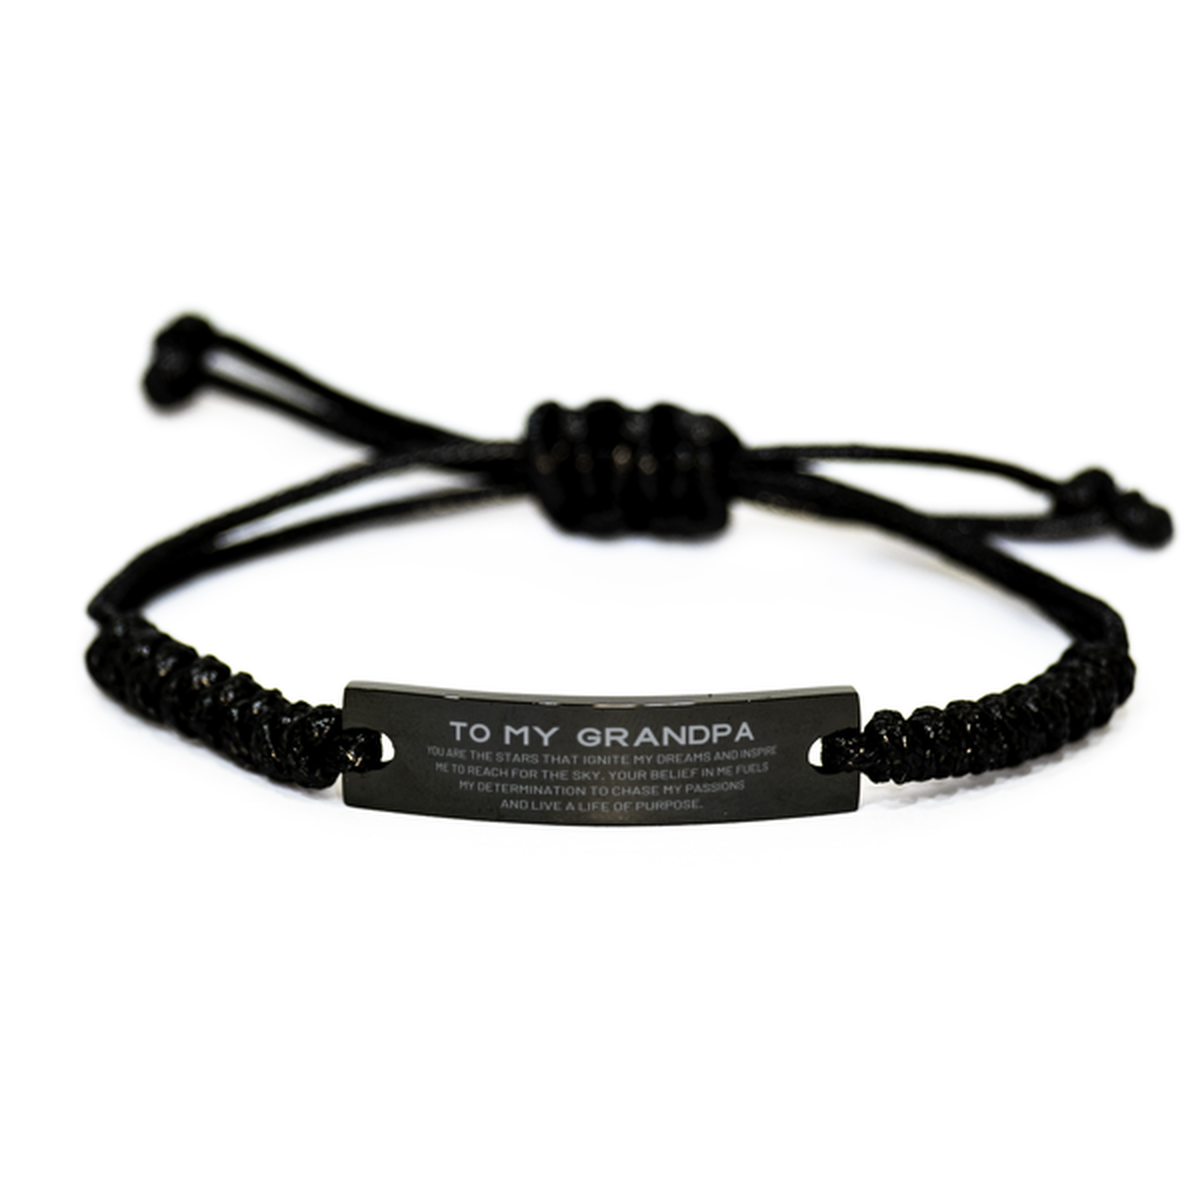 To My Grandpa Black Rope Bracelet, You are the stars that ignite my dreams and inspire me to reach for the sky, Birthday Unique Gifts For Grandpa, Thank You Gifts For Grandpa